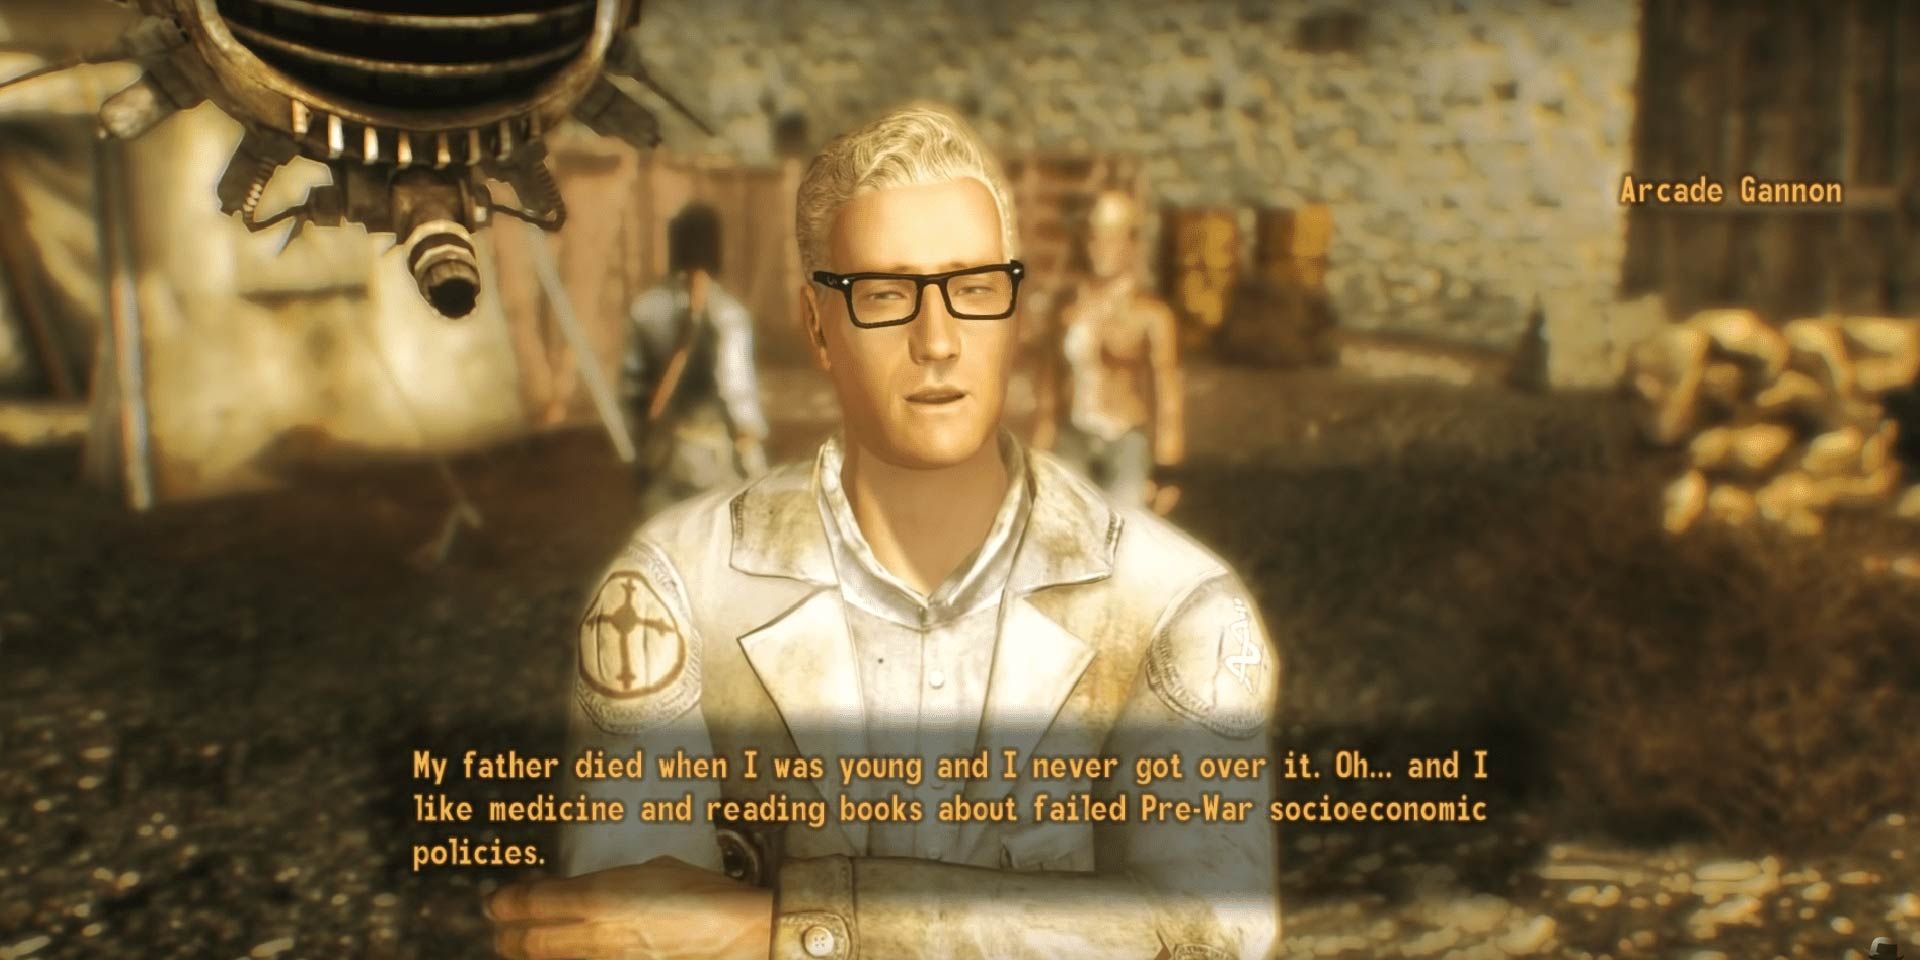 Arcade in New Vegas discussing his likes and dislikes.